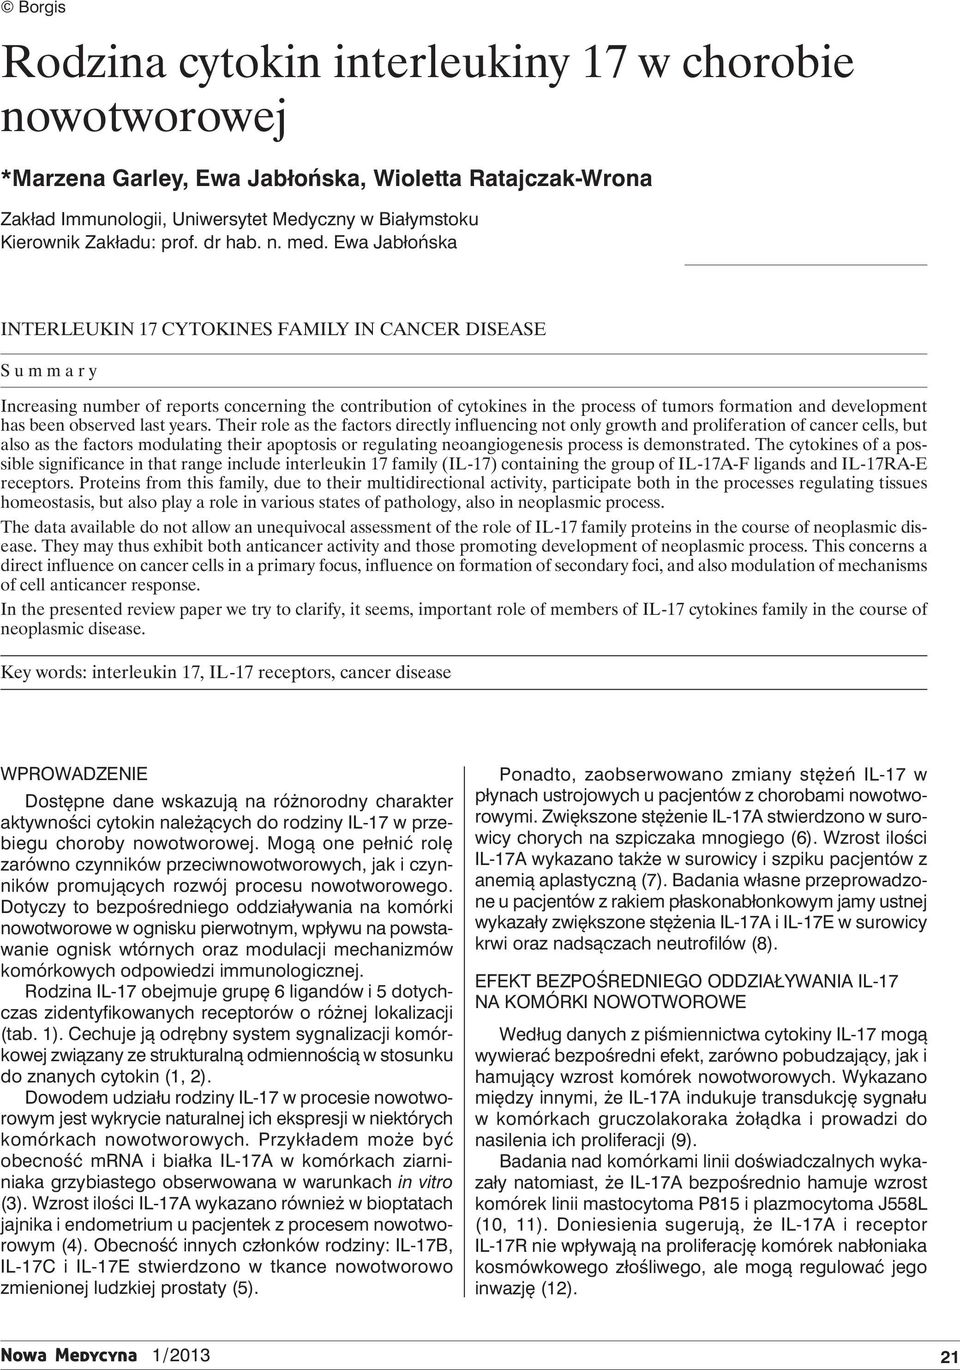 Ewa Jabłońska Interleukin 17 cytokines family in cancer disease Summary Increasing number of reports concerning the contribution of cytokines in the process of tumors formation and development has